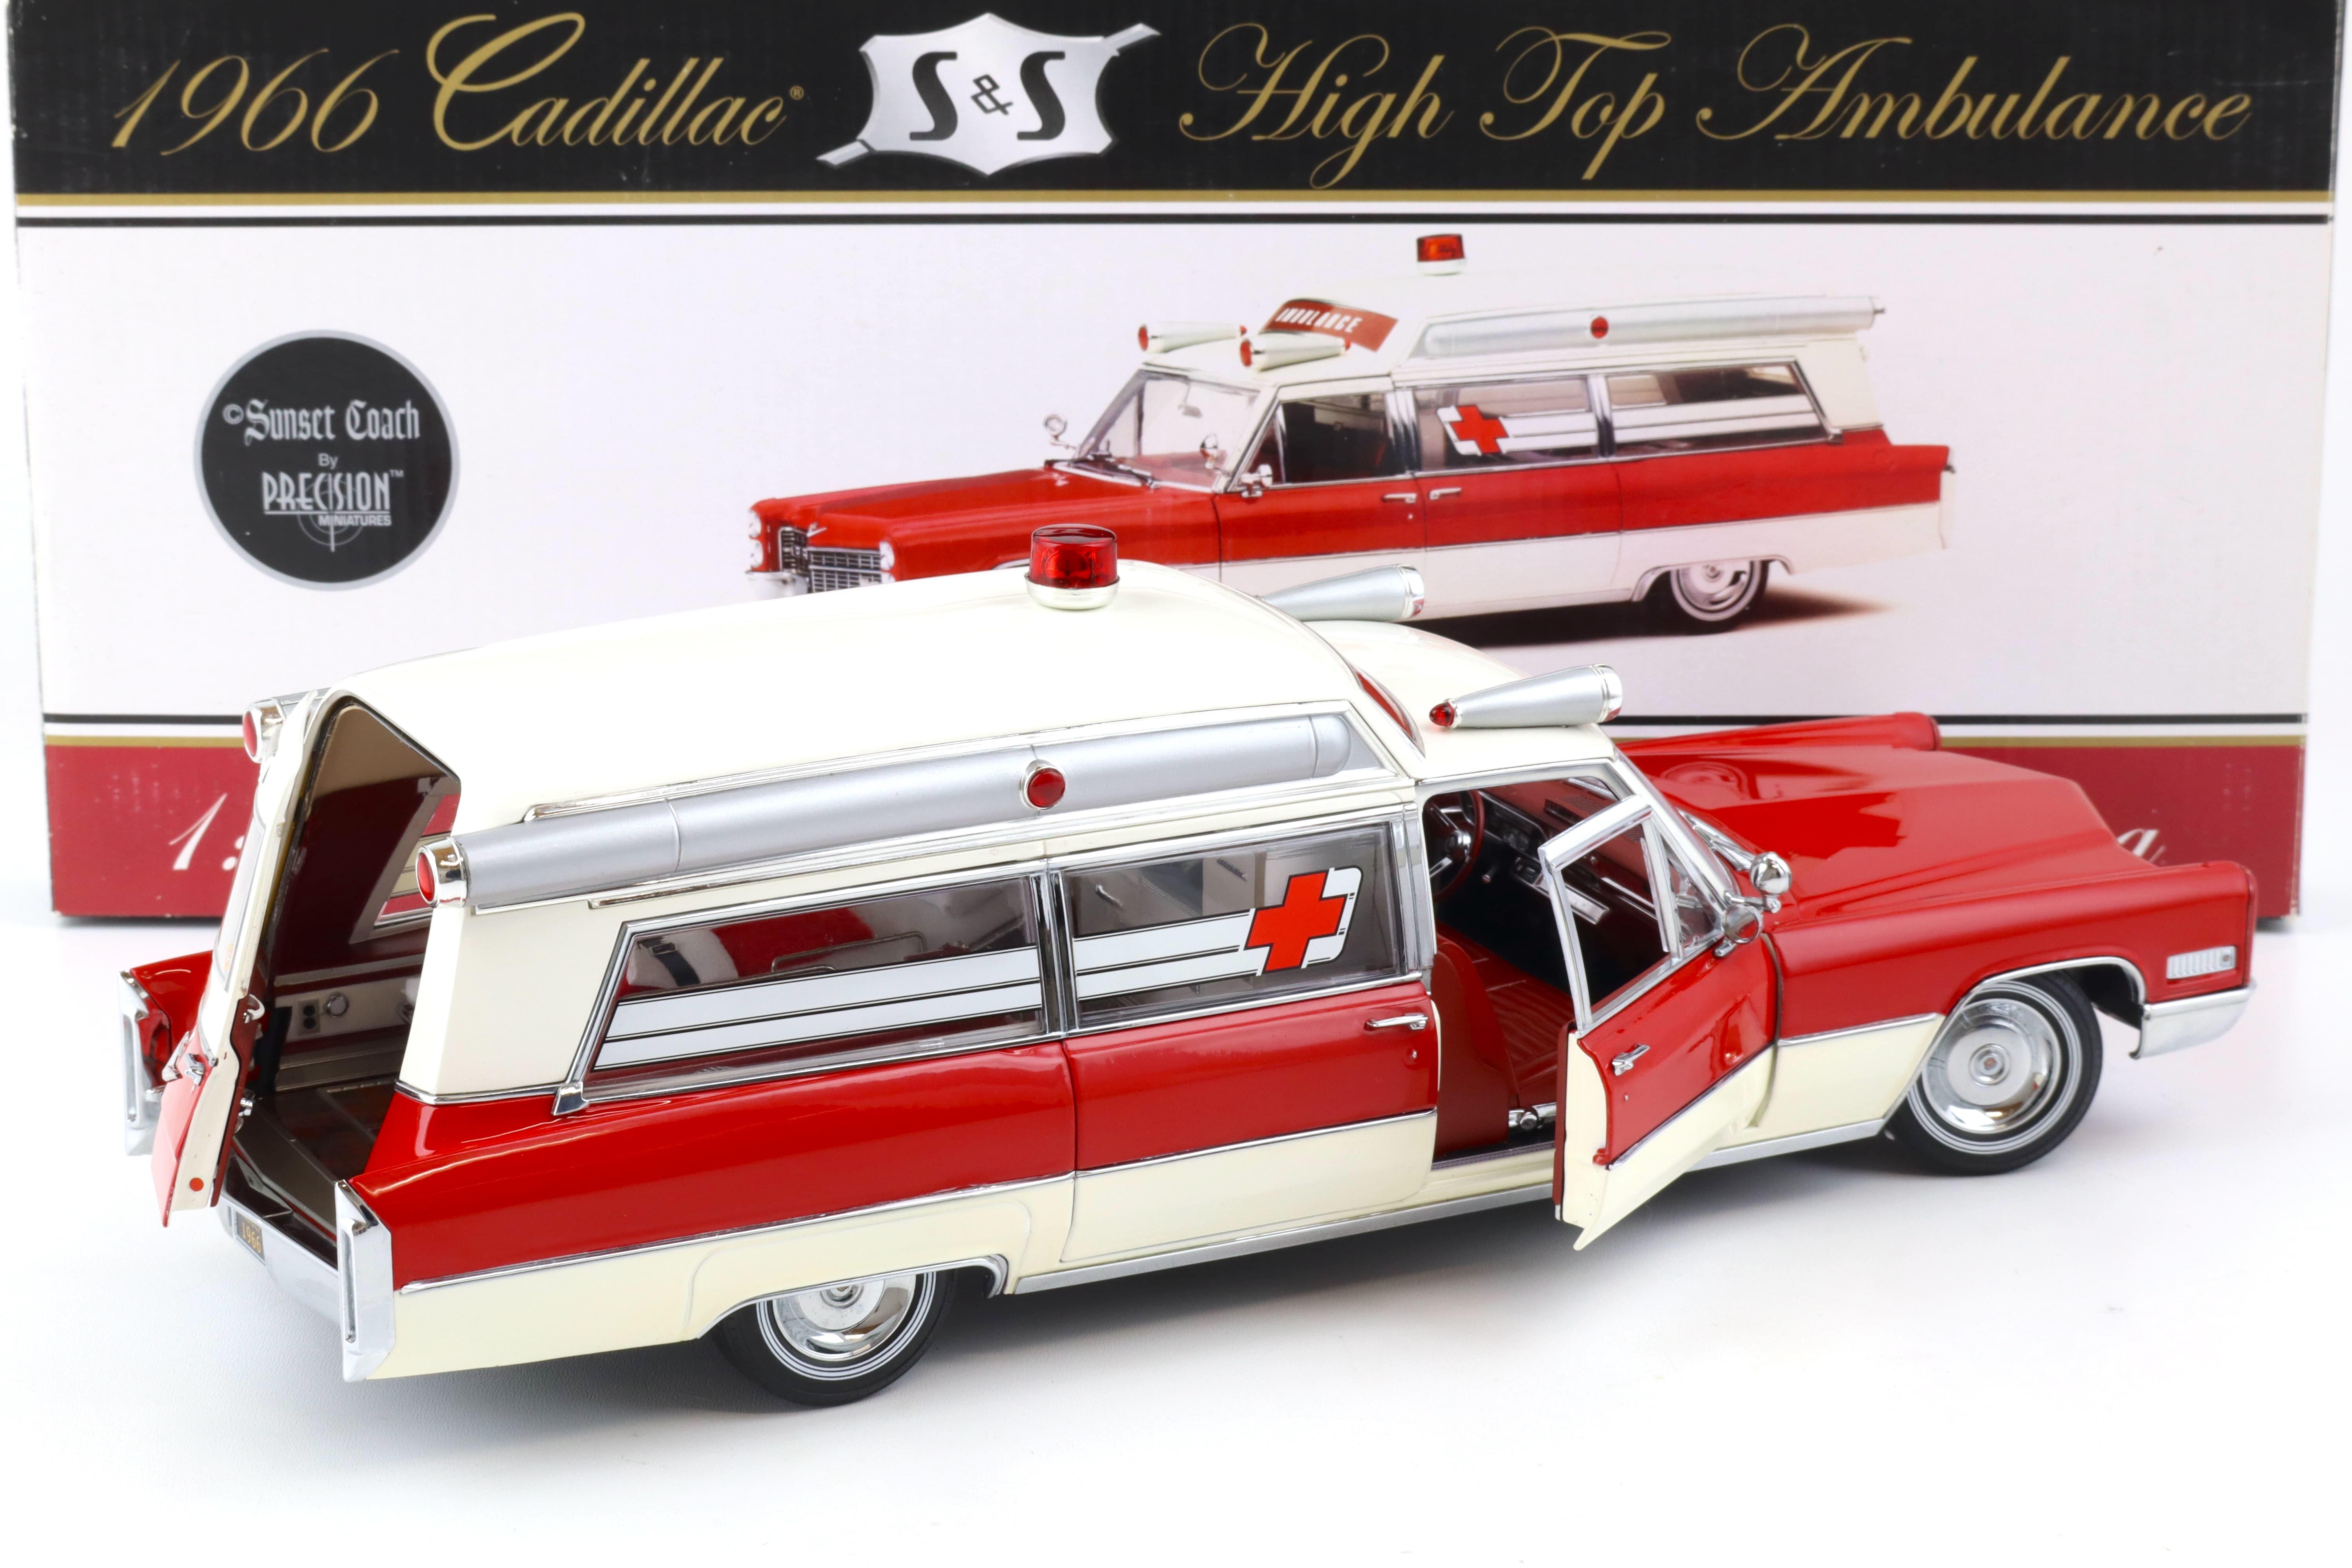 1:18 Sunset Coach Precision 1966 Cadillac S&S High Top Ambulance red/ white